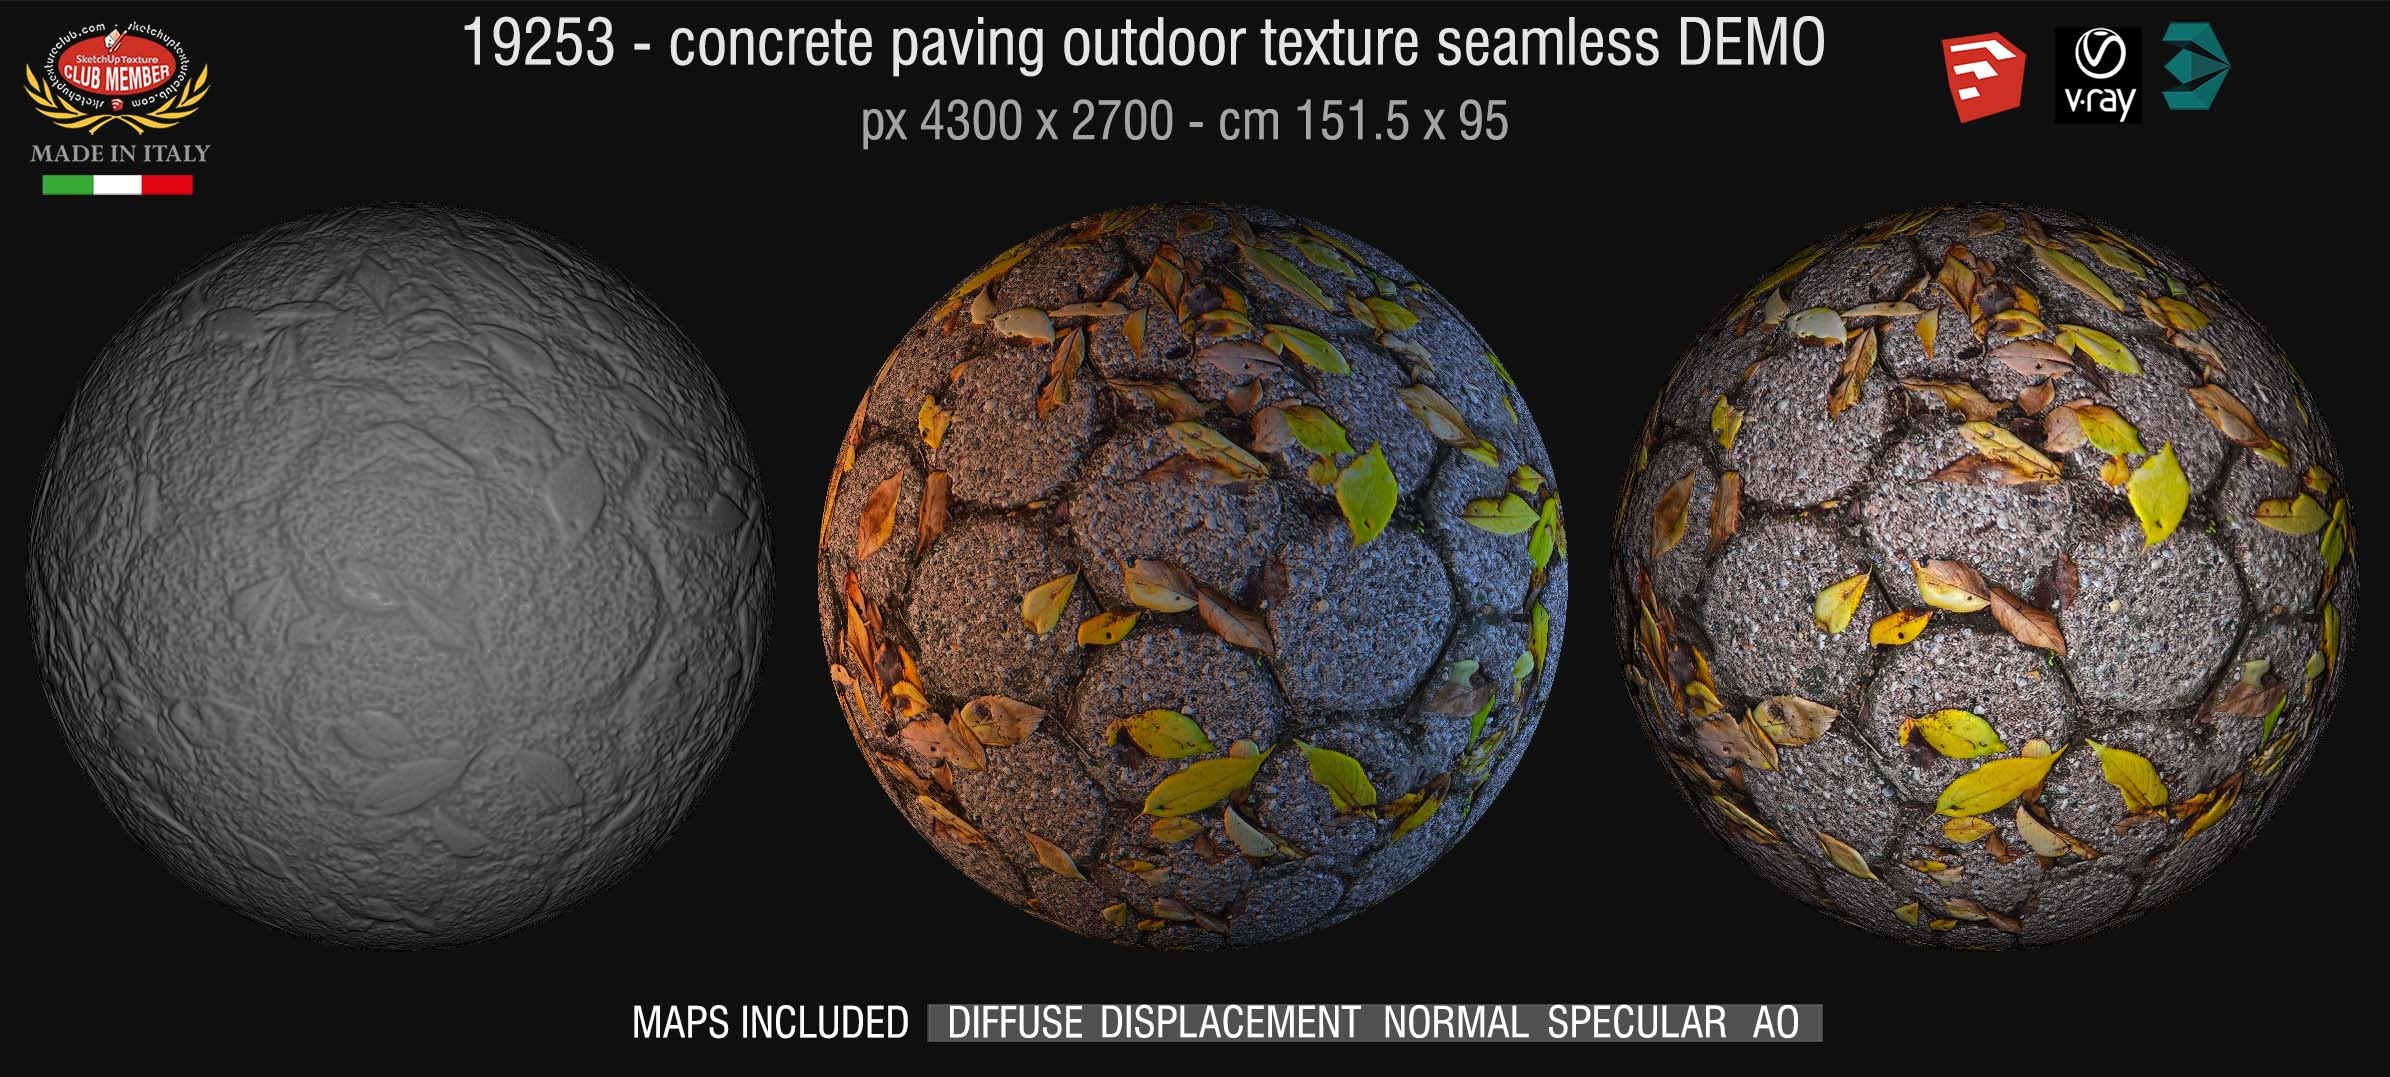 19253 HR Concrete paving outdoor with dead leaves texture + maps DEMO